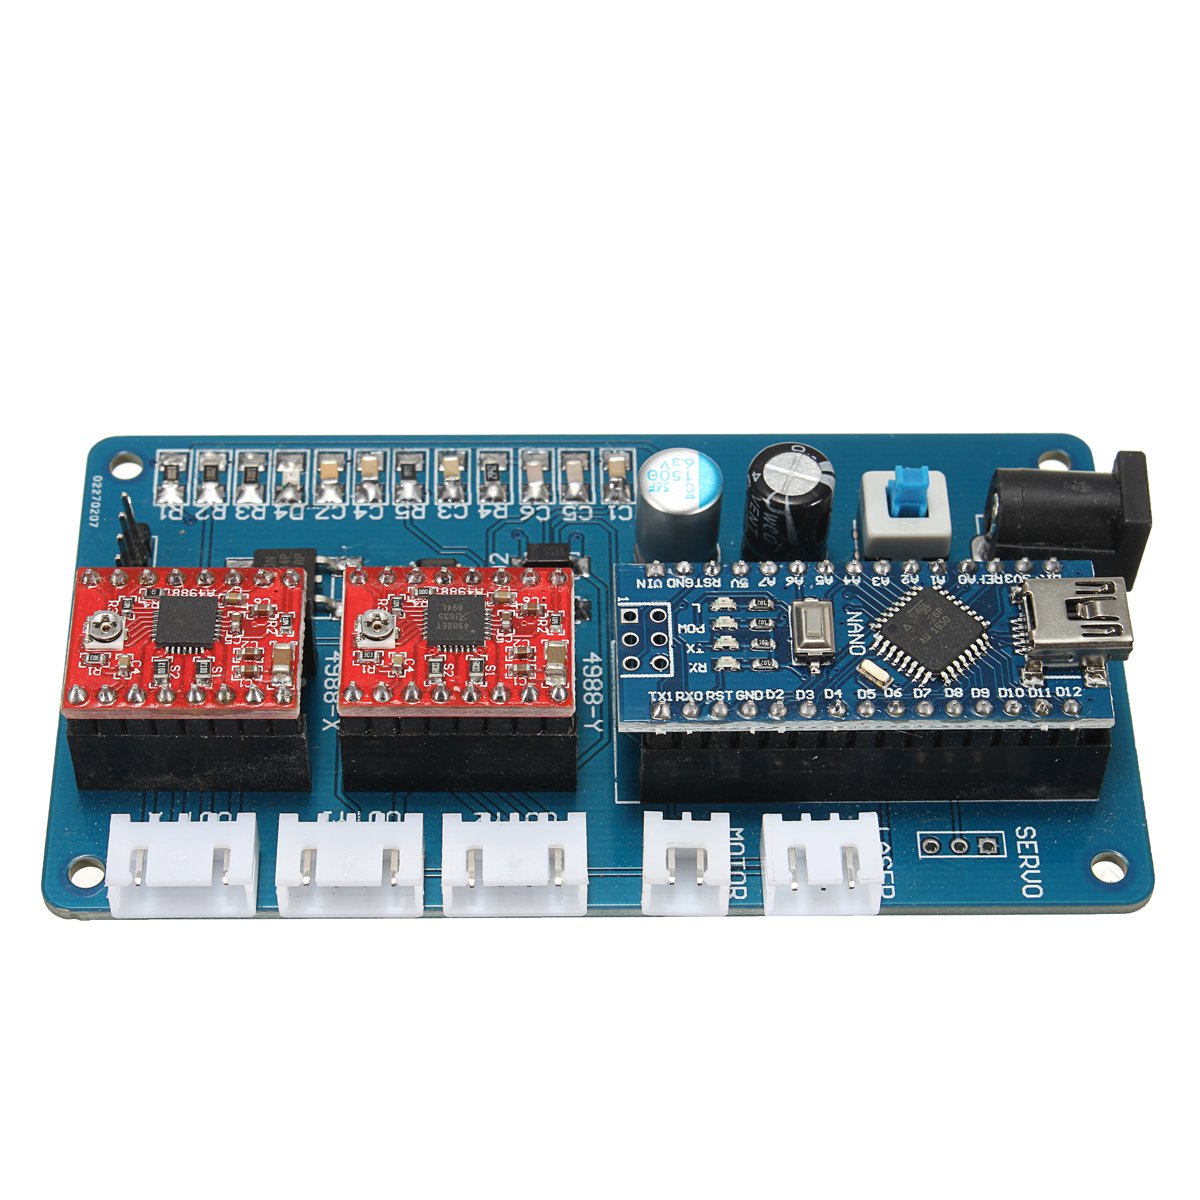 2 Axis GRBL Control Panel Board For DIY Laser Engraving Machine Benbox USB Stepper Driver Board 1